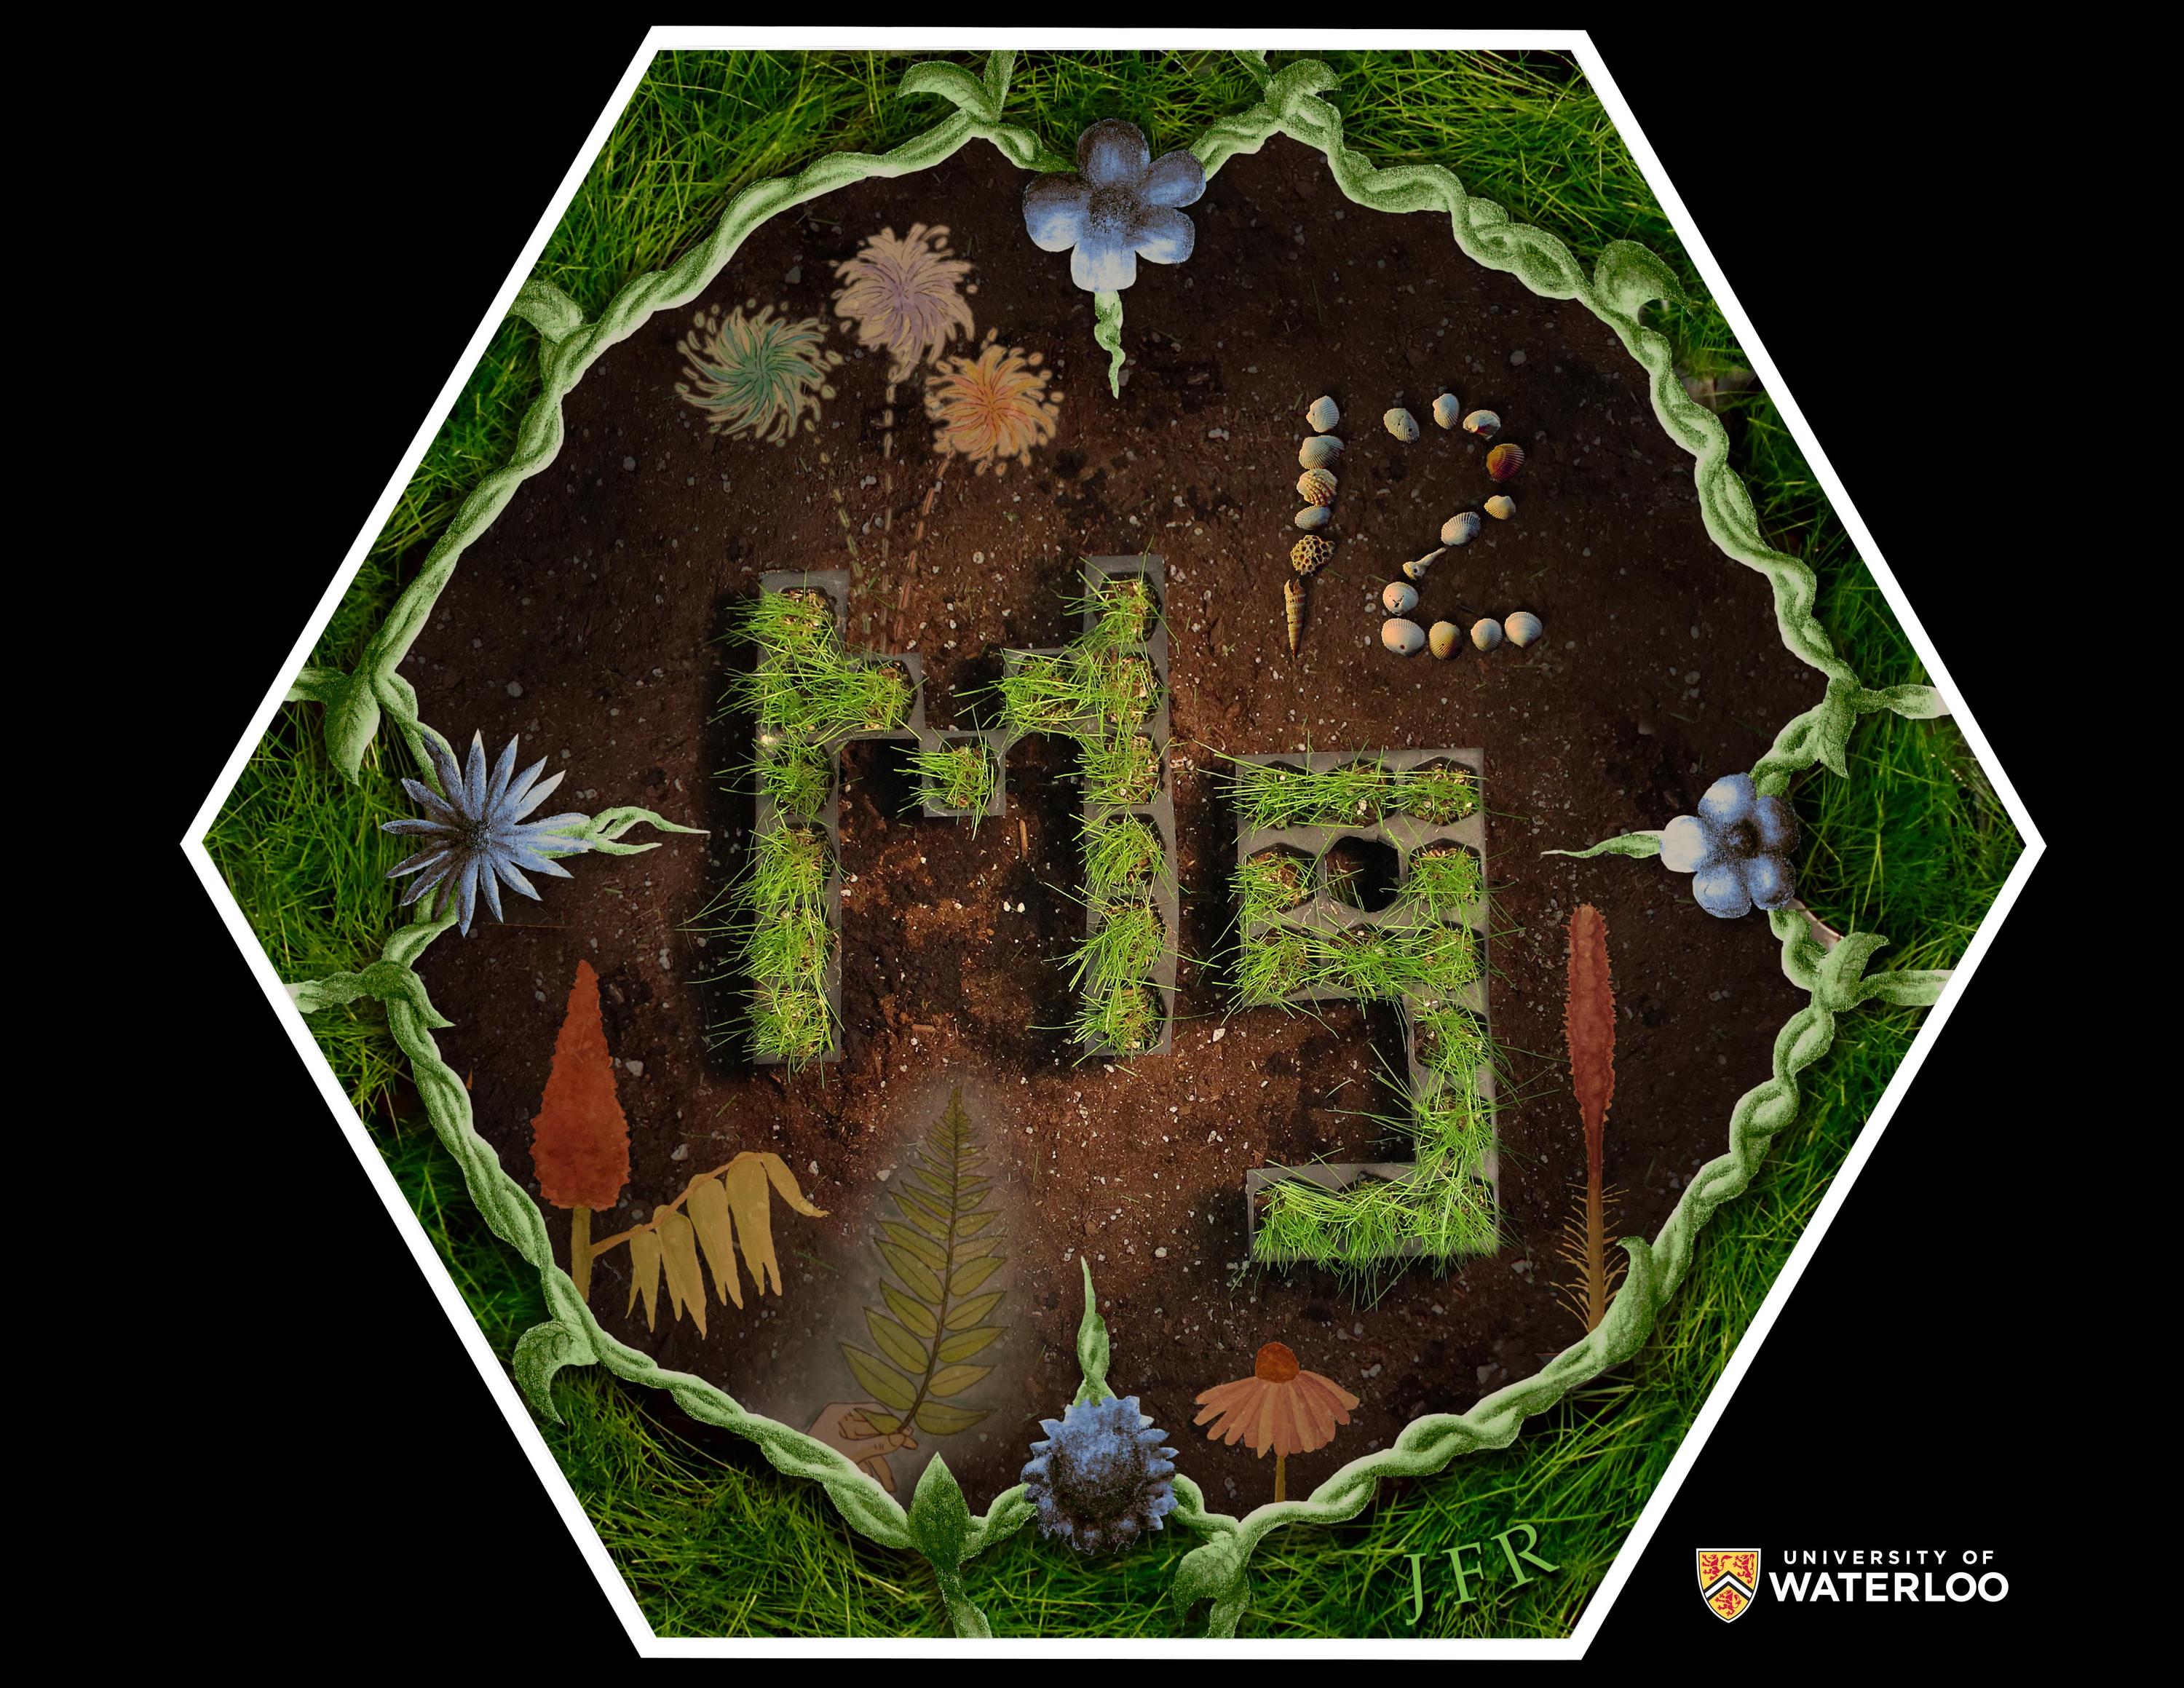 Digital composite of photos and illustrations. Chemical symbol “Mg” spelled out in pots of grass. Atomic number “12” spelled out in shells. The background is soil and surrounding illustrations include plants, flowers, grass and vines.